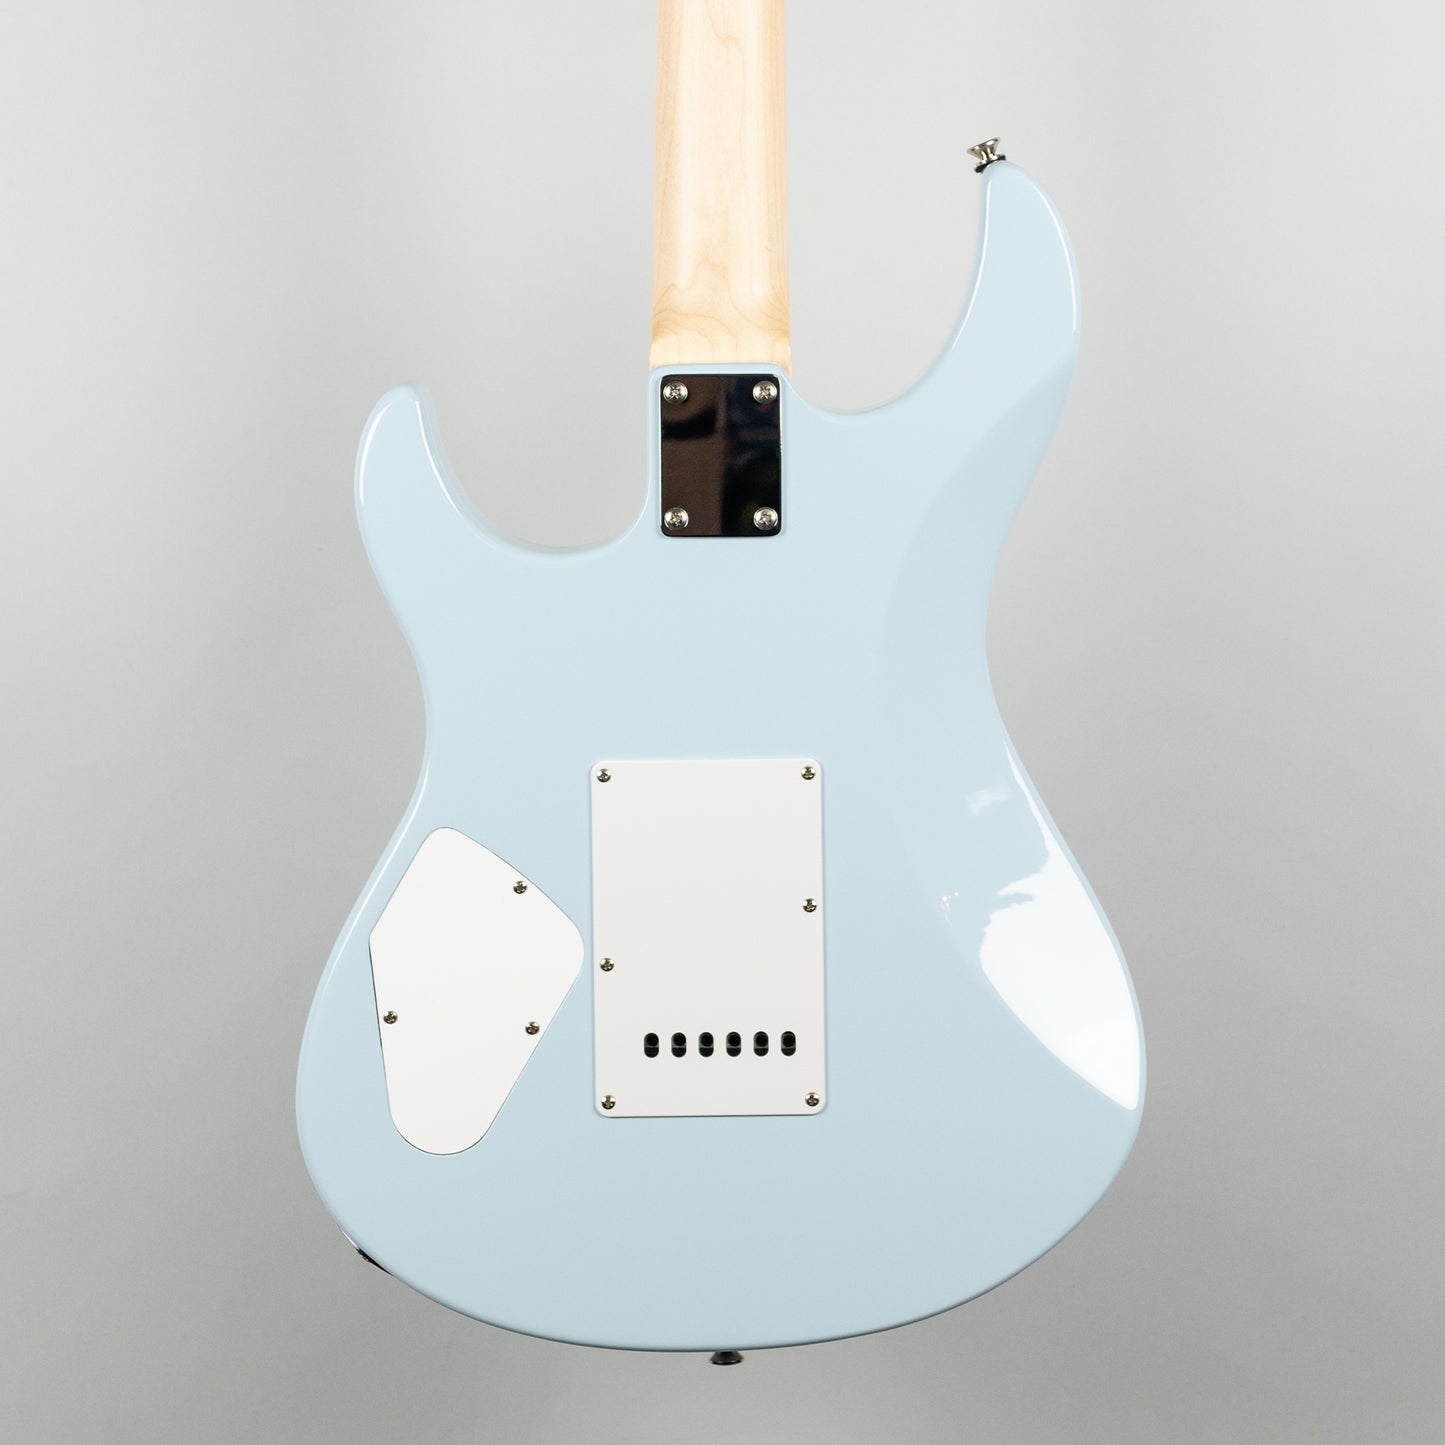 Yamaha Pacifica PAC112VM-ICB Electric Guitar in Ice Blue